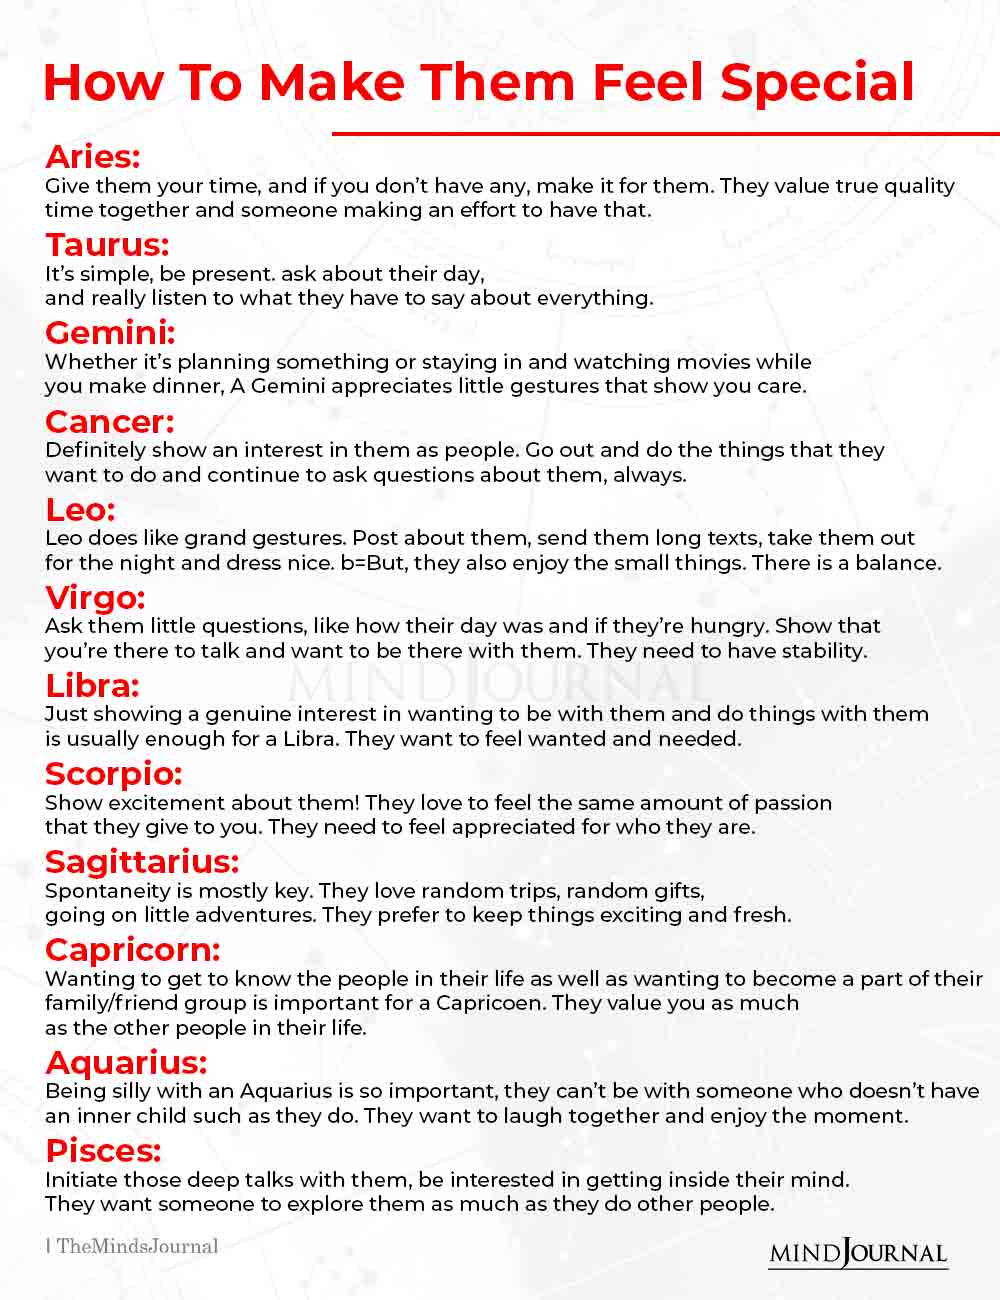 How To Make The Zodiac Signs Feel Special